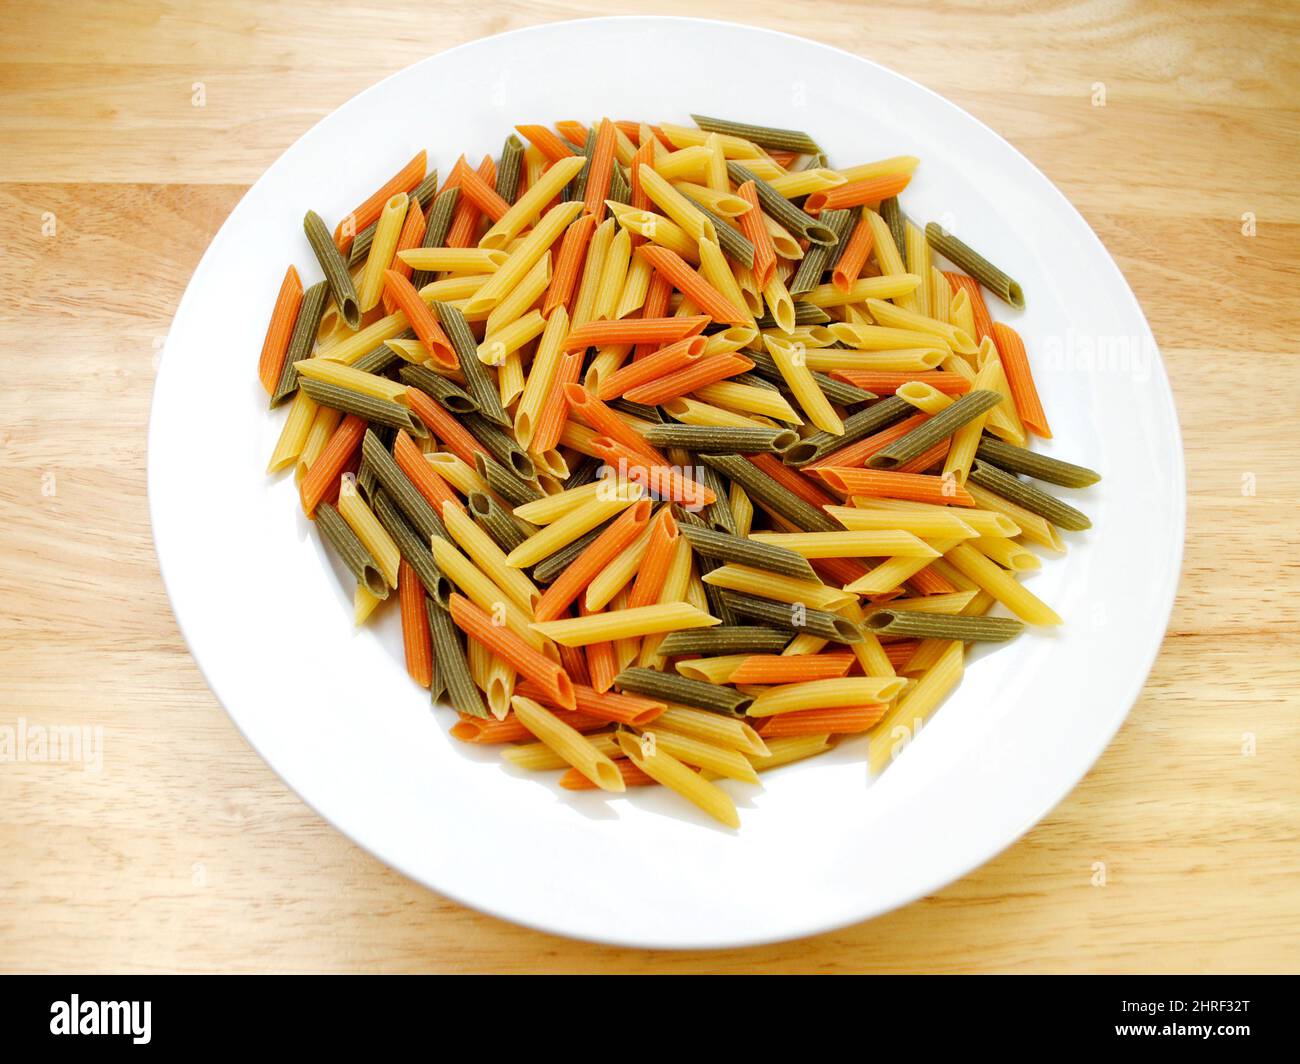 Bowl of Dry Cylinder-shaped Penne Pasta Noodles in Three Colors Yellow, Green and Red Stock Photo